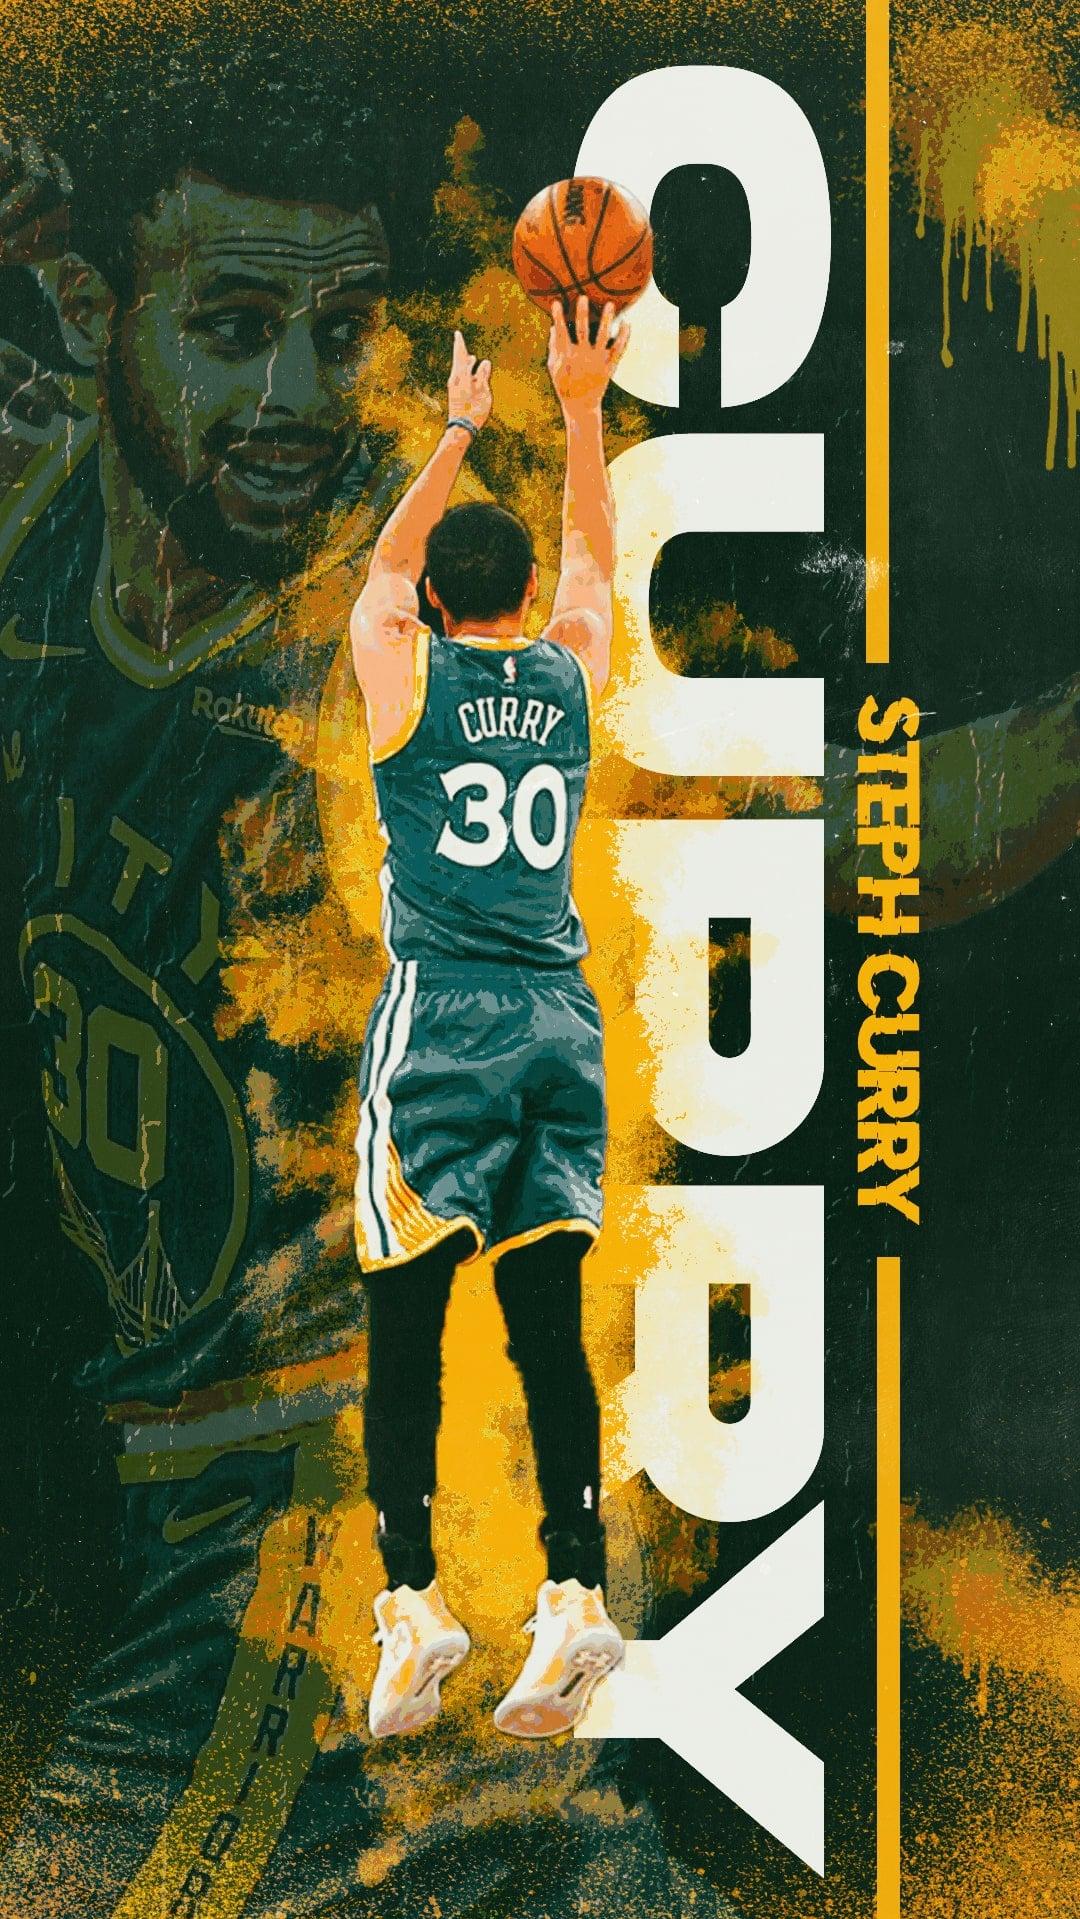 Steph Curry Mobile Wallpaper Made In Photoshop R iPhonewallpaper